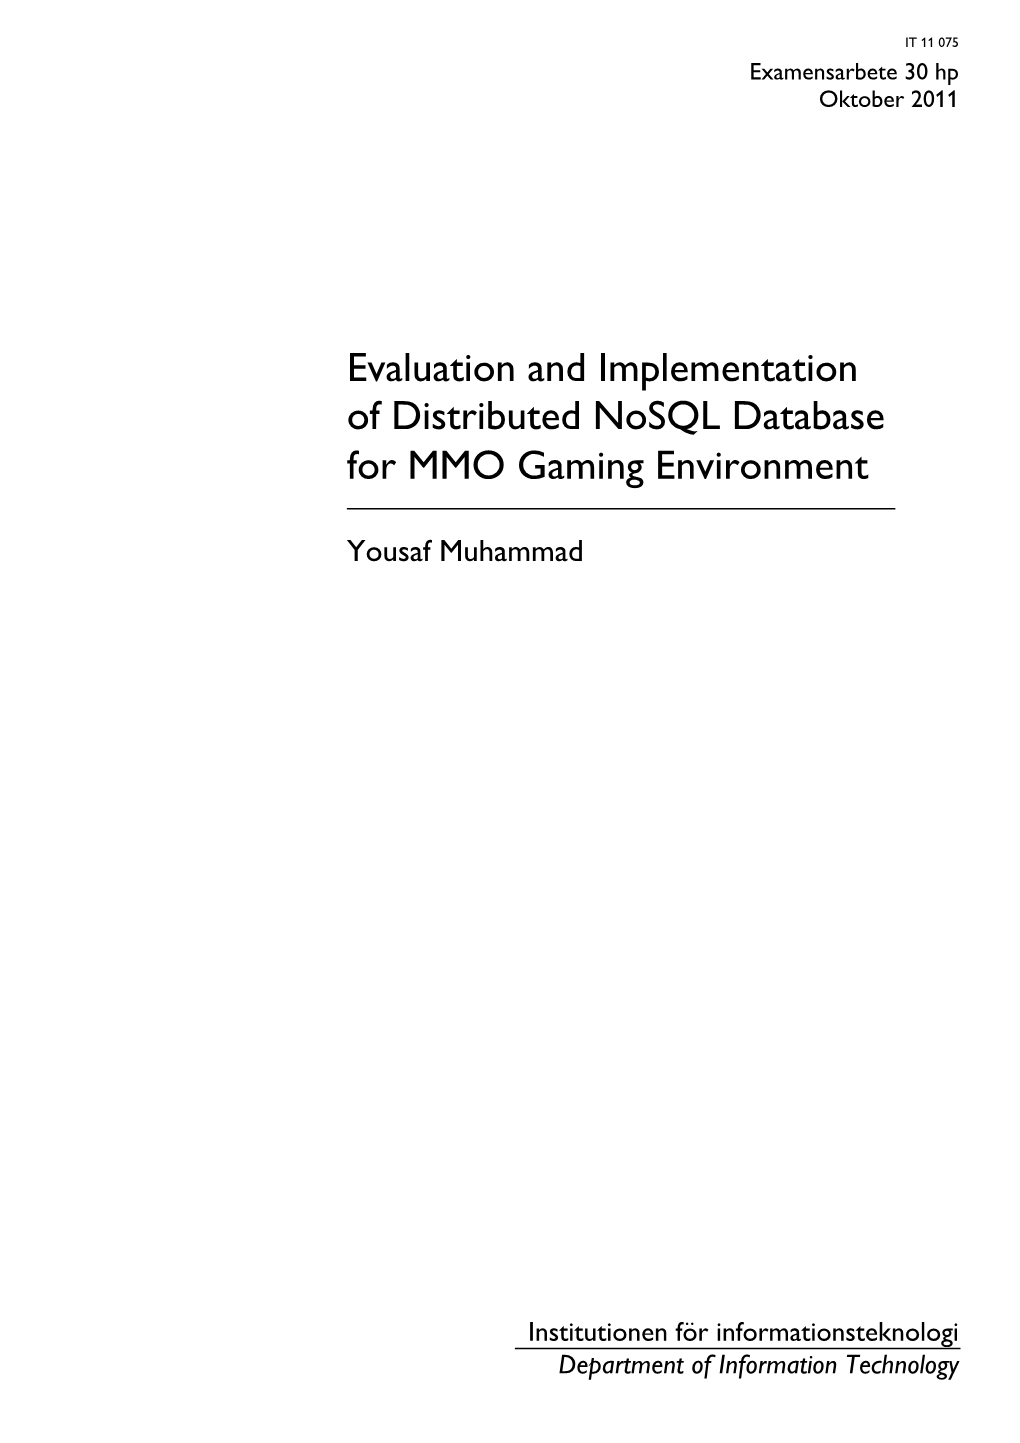 Evaluation and Implementation of Distributed Nosql Database for MMO Gaming Environment